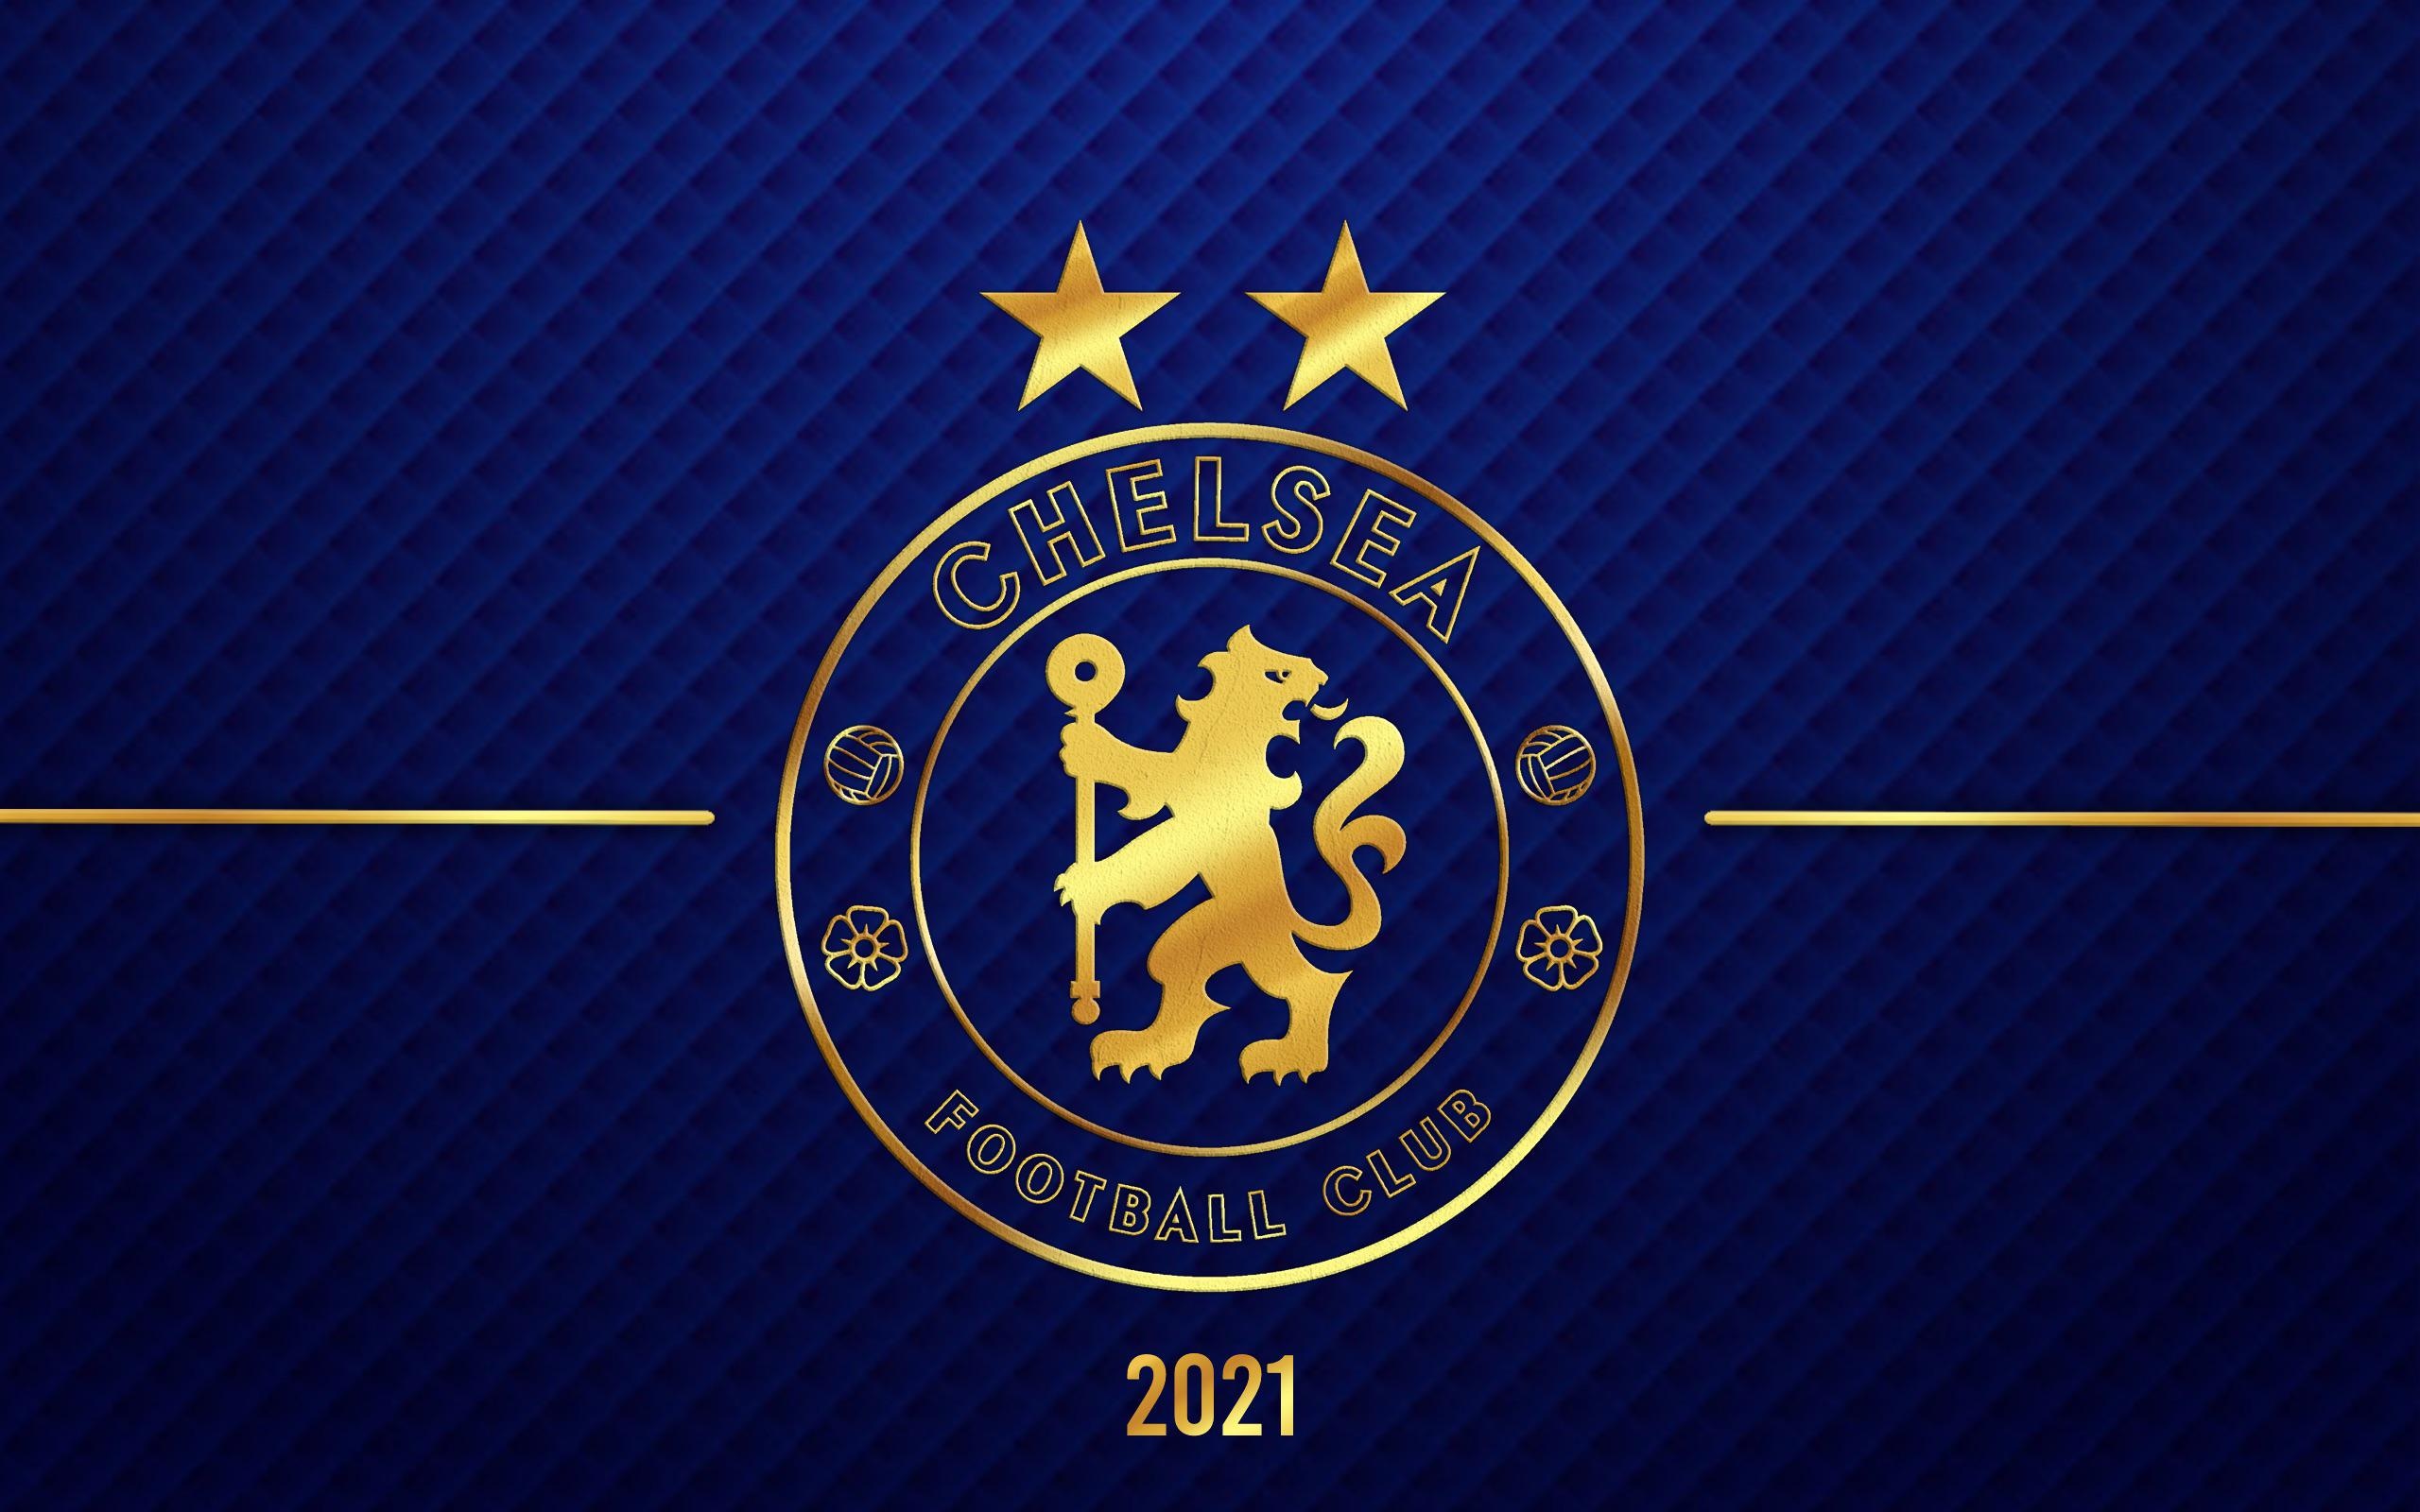 Chelsea: The Blues, One of the world’s richest, biggest, and most-supported football clubs. 2560x1600 HD Background.